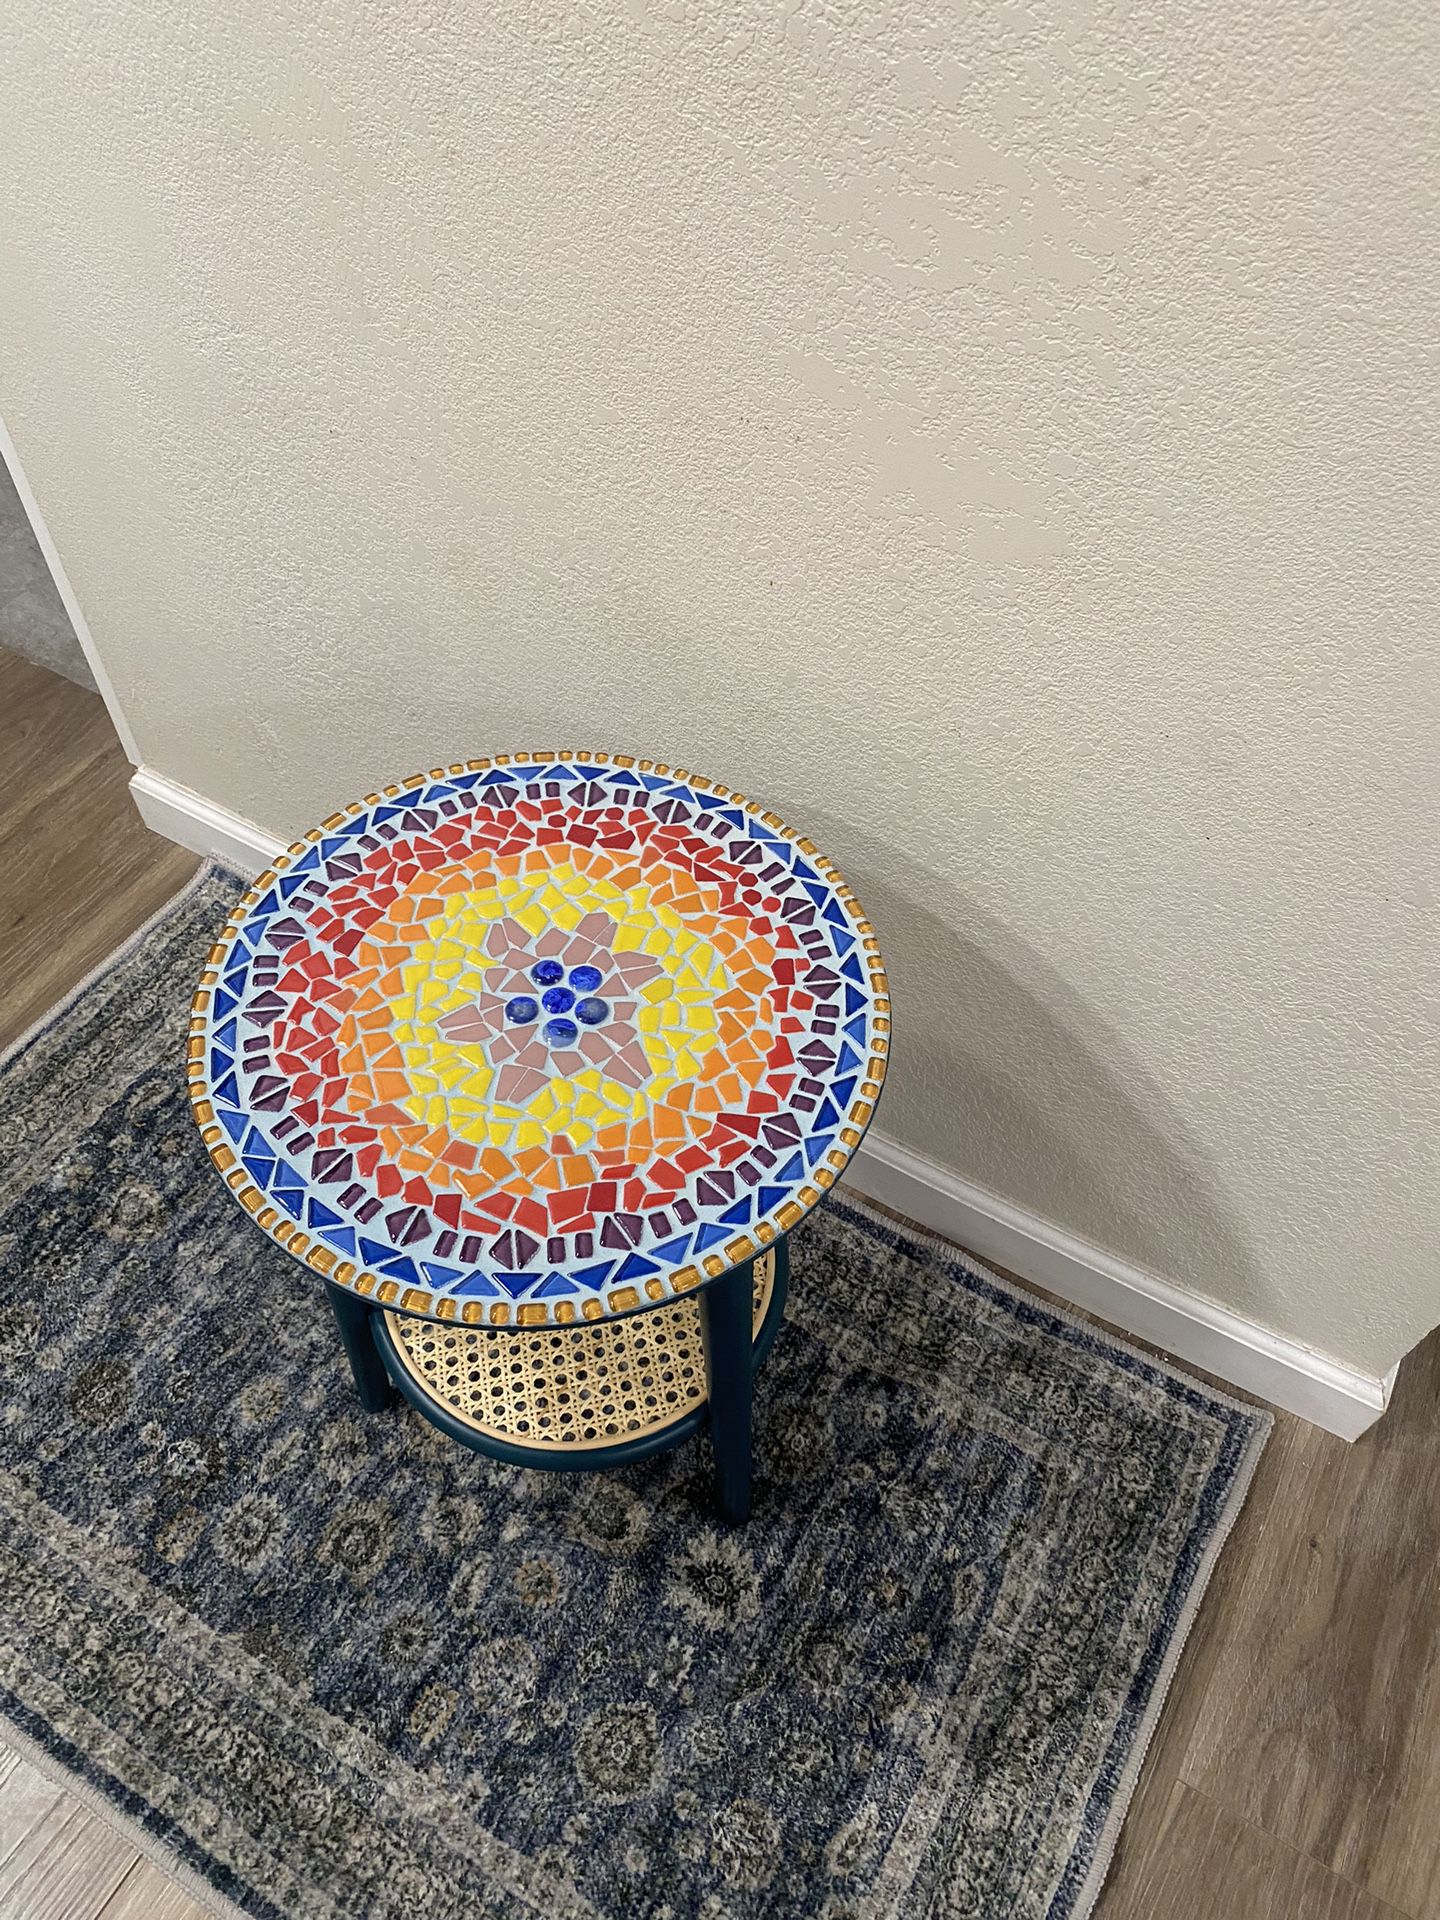 Small Round Mosaic Table